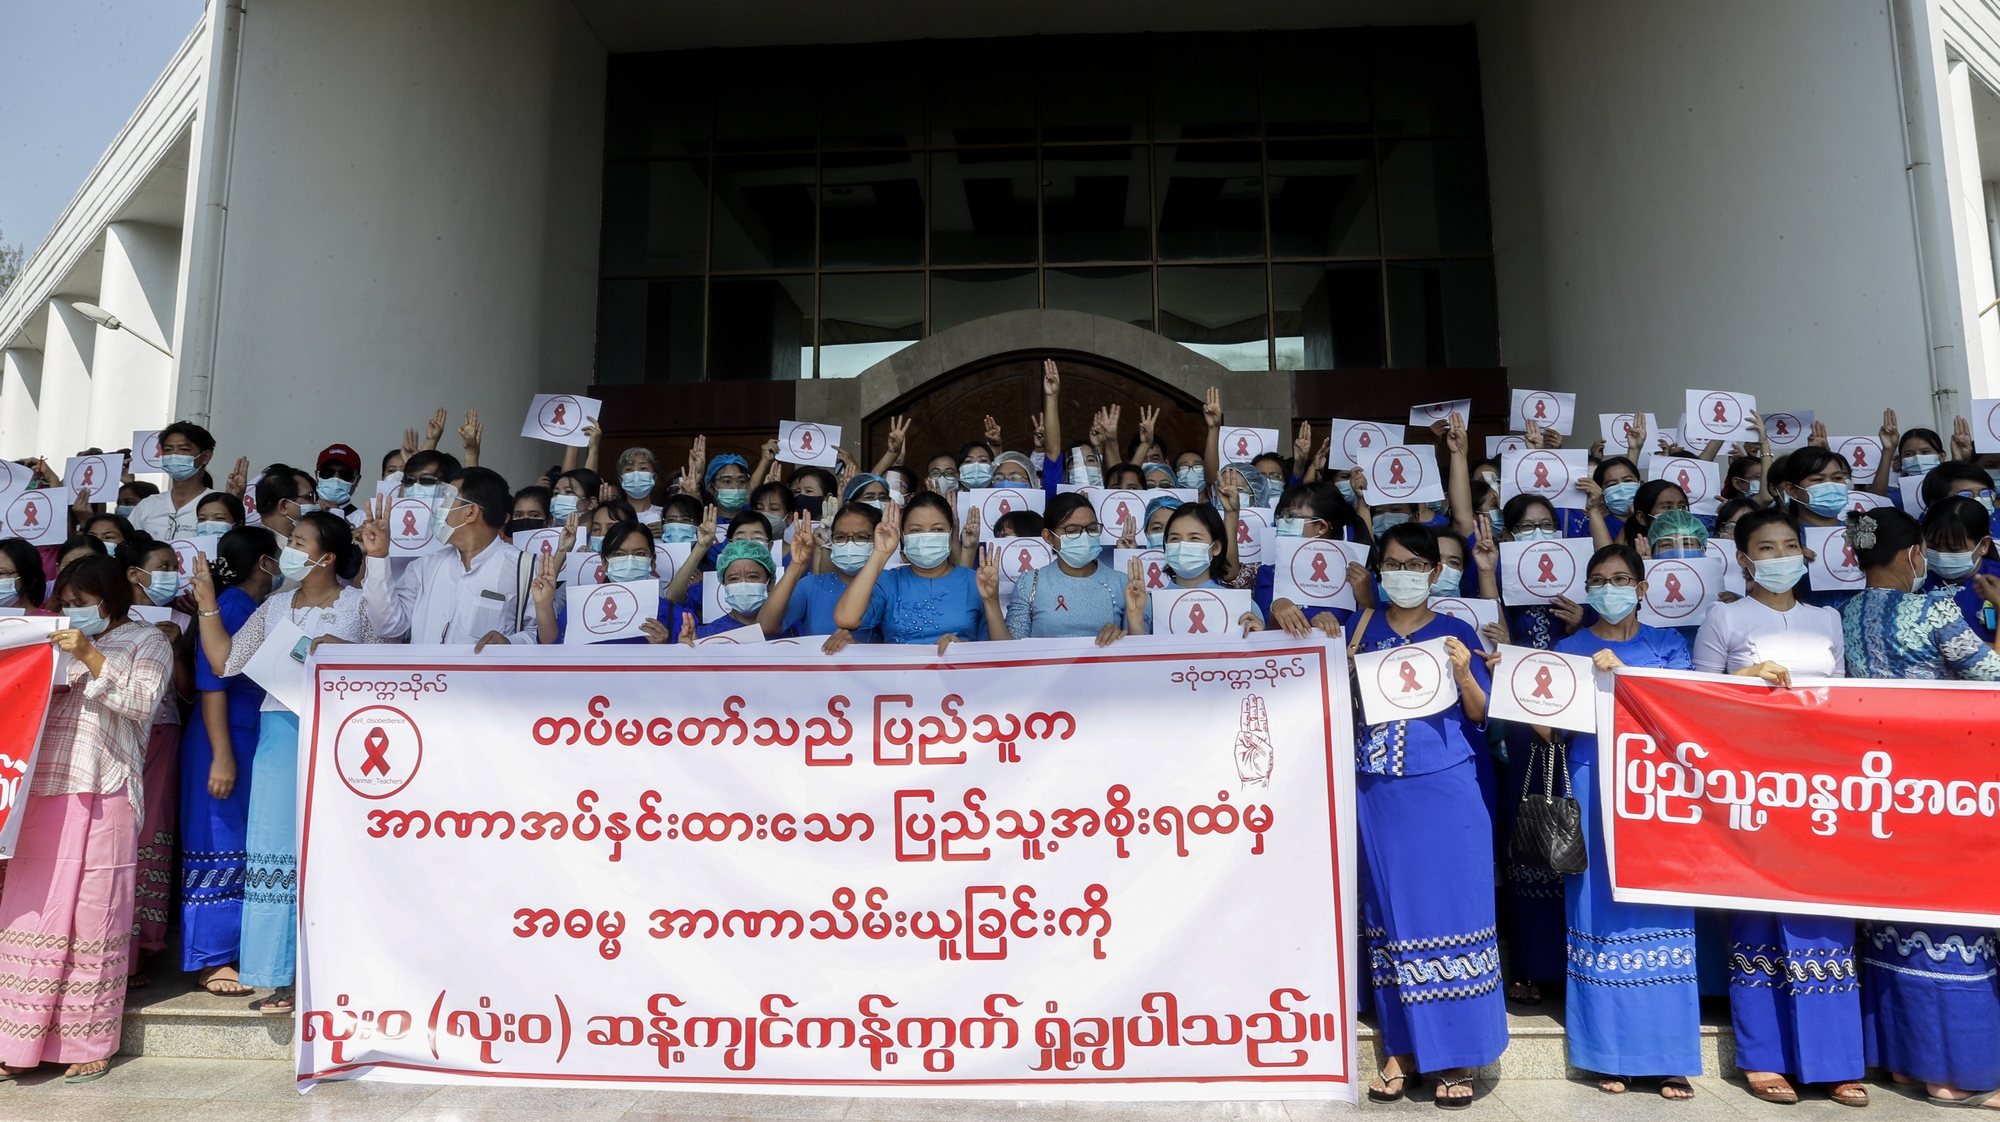 epa08988239 Teachers of Dagon University hold up placards and flash the three-finger salute as a sign of defiance during a civil disobedience campaign against the military coup, in Yangon, Myanmar, 05 February 2021. Teachers and students joined a nationwide strike as part of a civil disobedience campaign started by medical workers protesting against the recent military coup. Aung San Suu Kyi and other top political leaders were detained in a military coup on 01 February amid allegations of voter fraud in the November 2020 elections.  EPA/LYNN BO BO